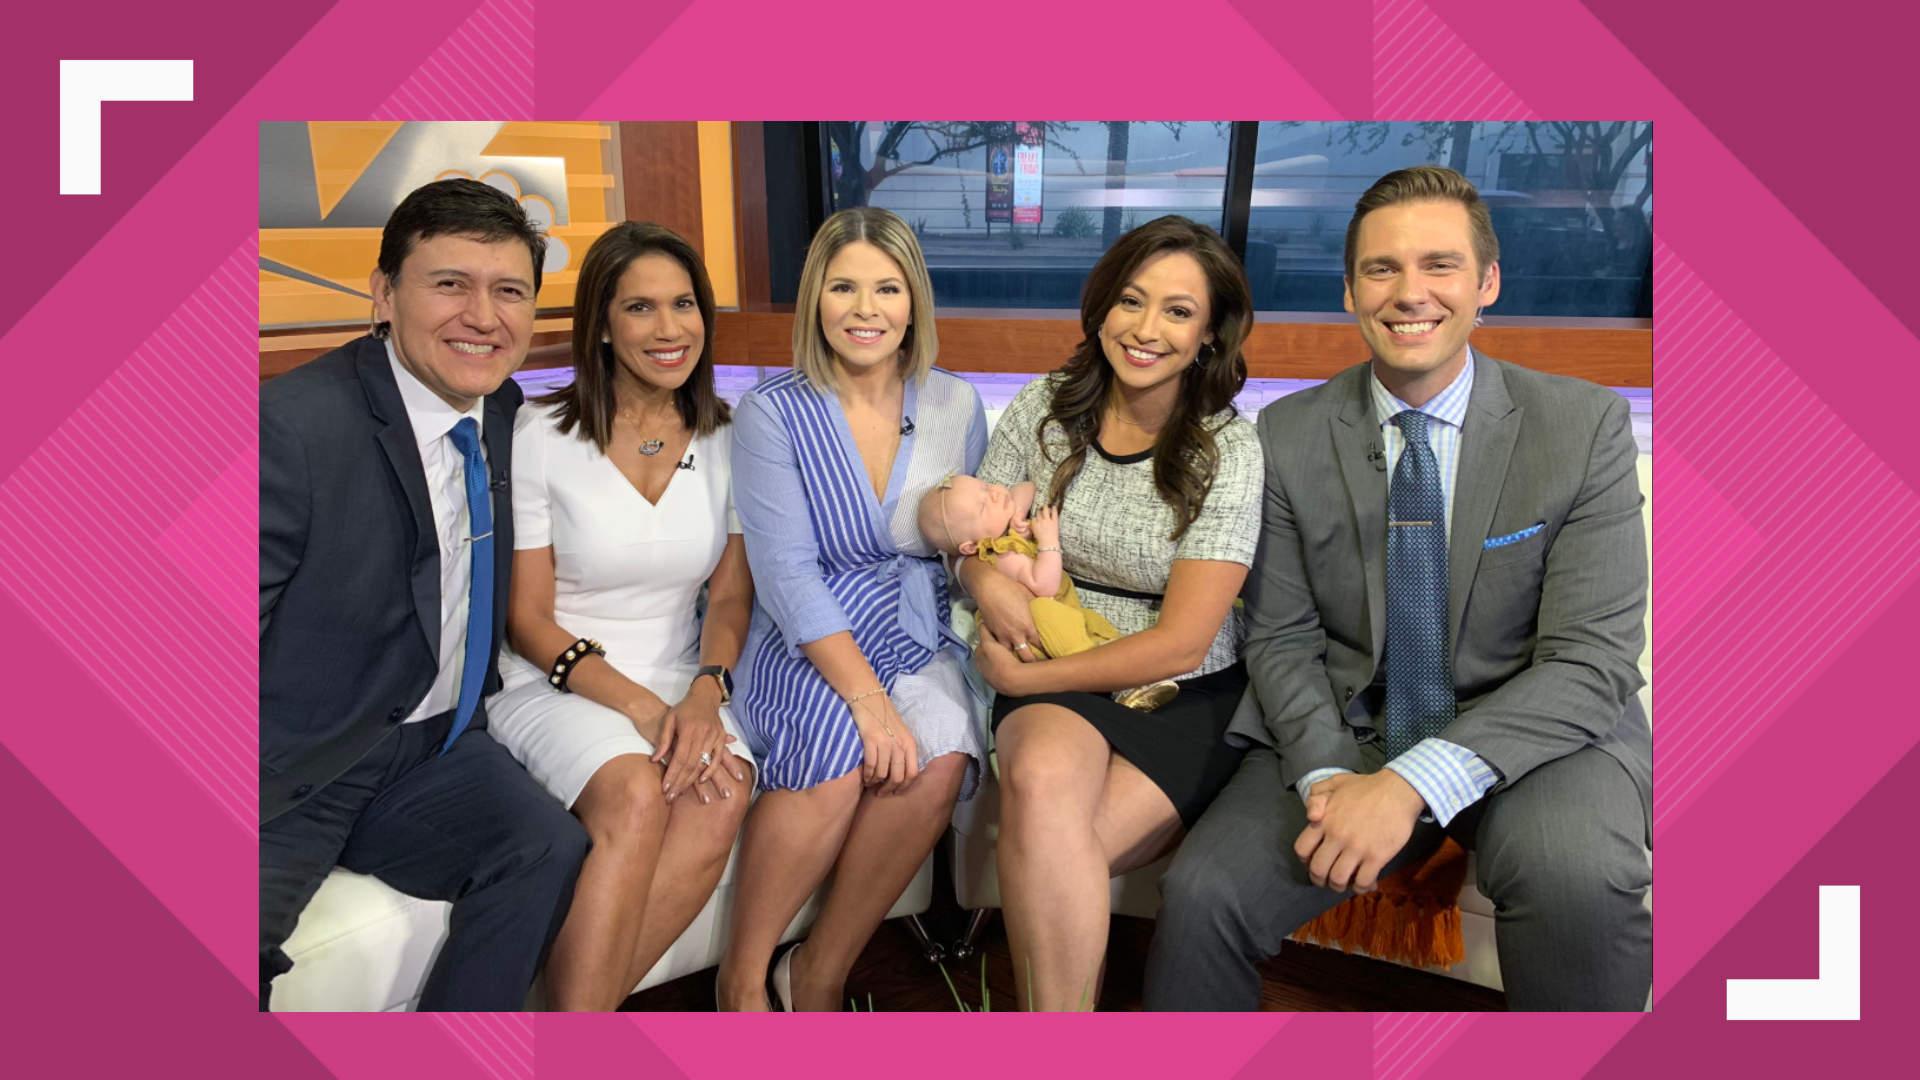 Emma Jade stopped by Studio 12A to introduce baby Eden to the Today in AZ team.